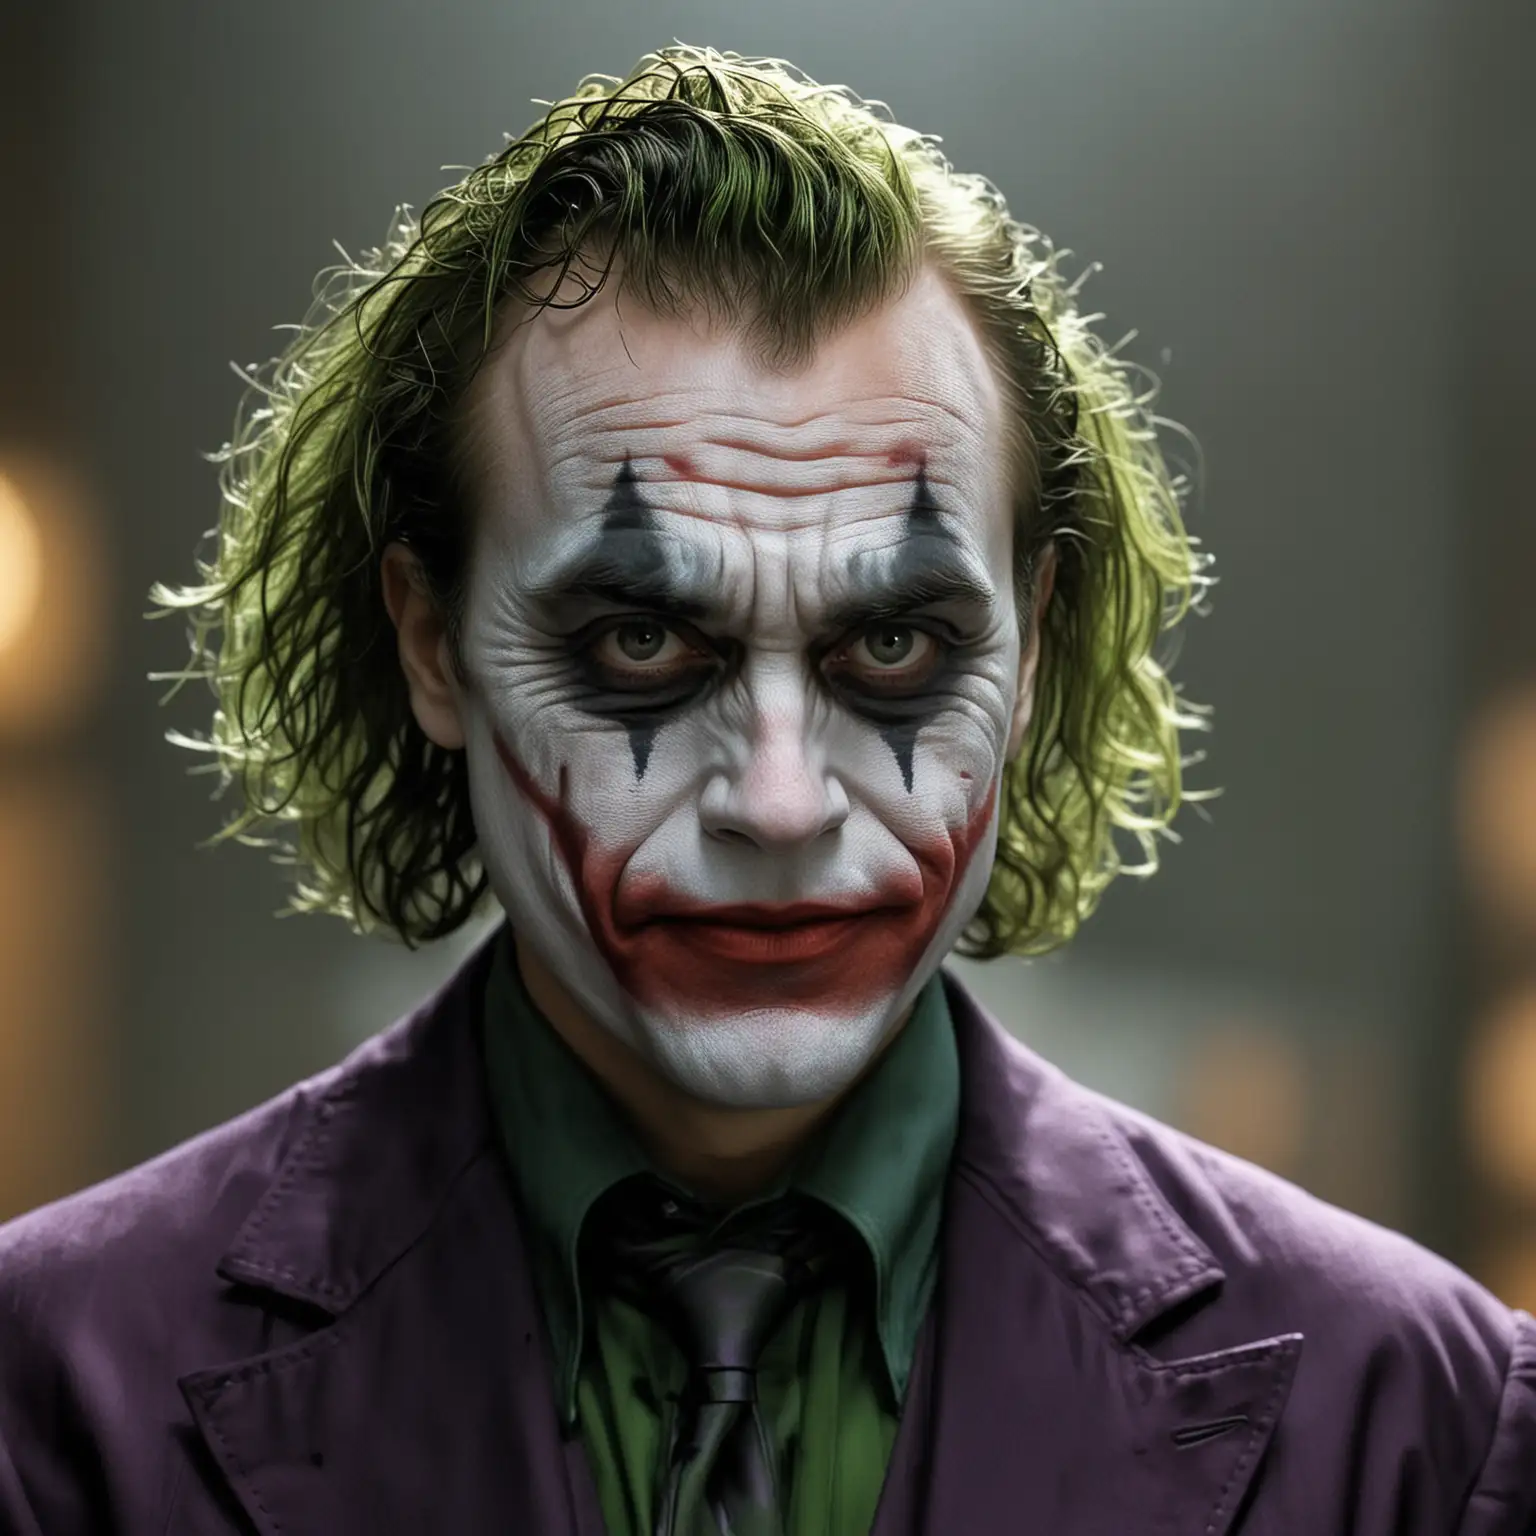 Picture of the joker from the movie with the write why so serious